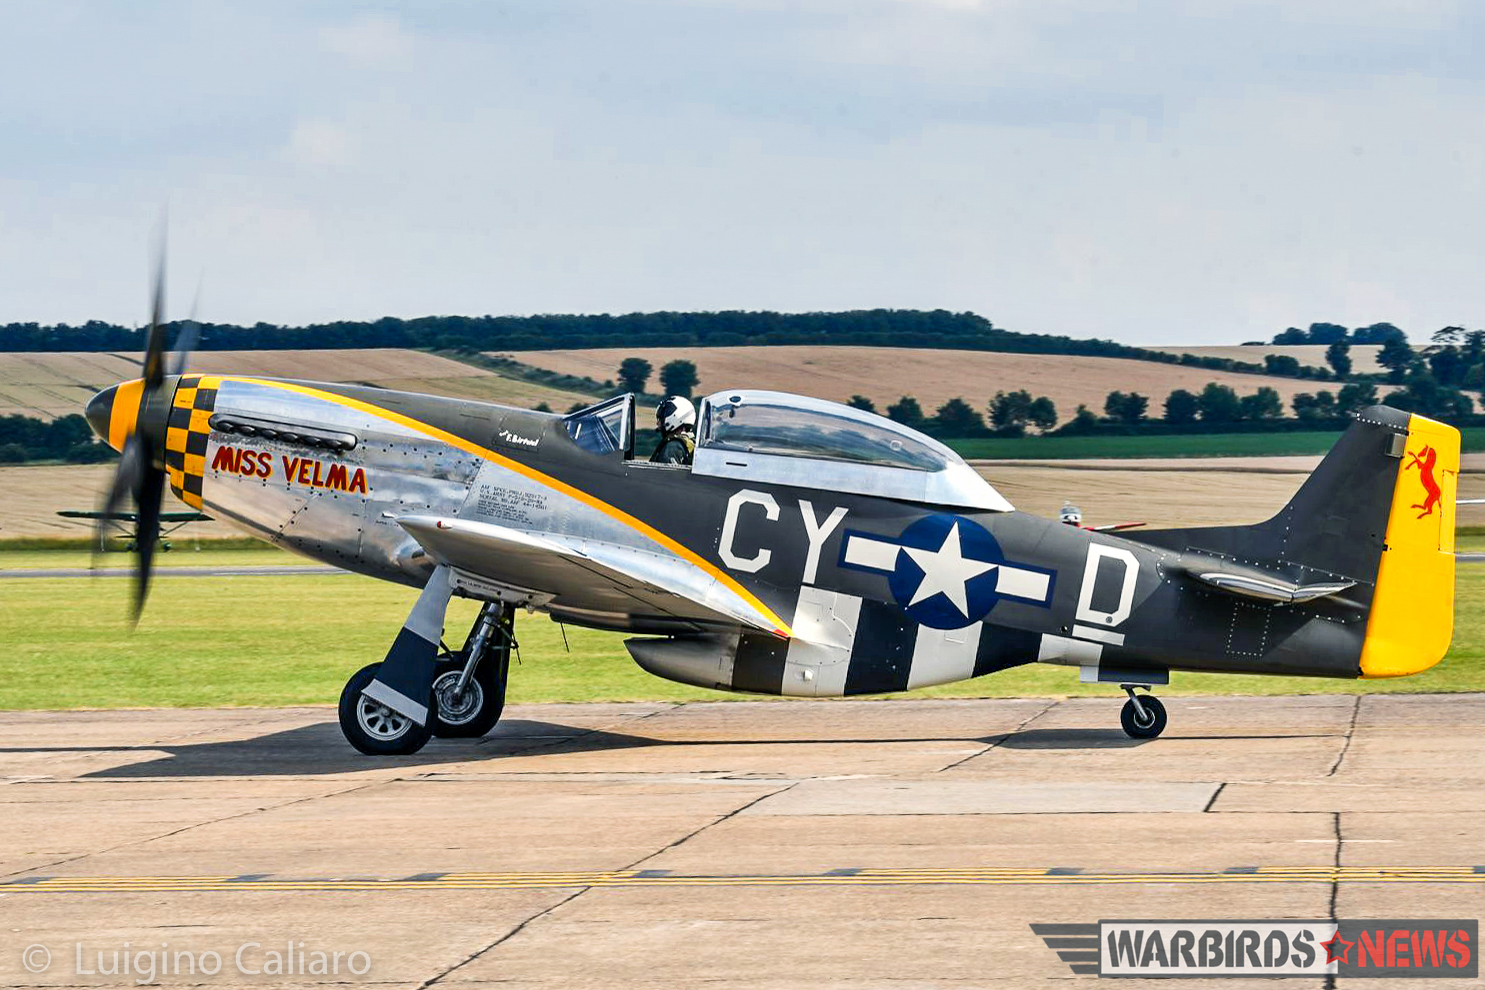 The ill-fated P-51D 'Miss Velma' taxies out for takeoff before the Balbo. As these words were written, the Mustang was already back at Duxford, on its gear, undergoing damage assessment. (photo by Luigino Caliaro)